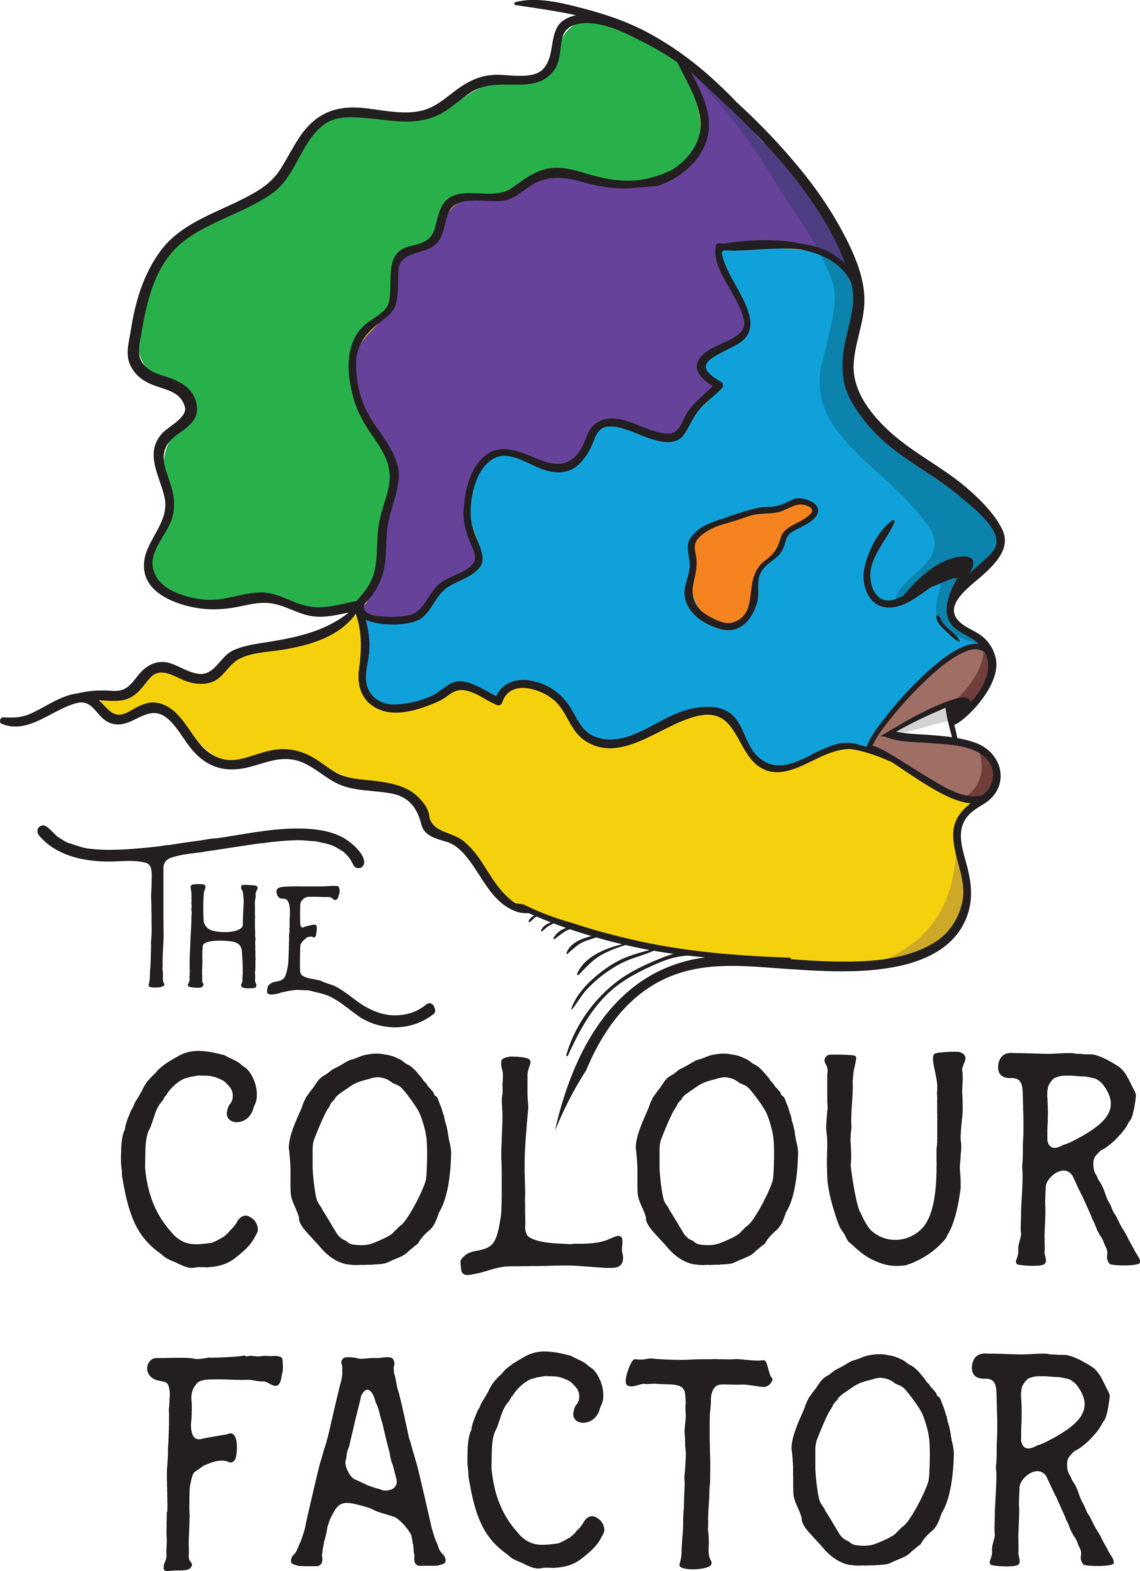 The Colour Factor is a non-profit organisation that seeks to to decolonize wellness and create brave spaces of healing for Black, Indigenous and Racialized People, through Conversation, Collaboration and Creativity